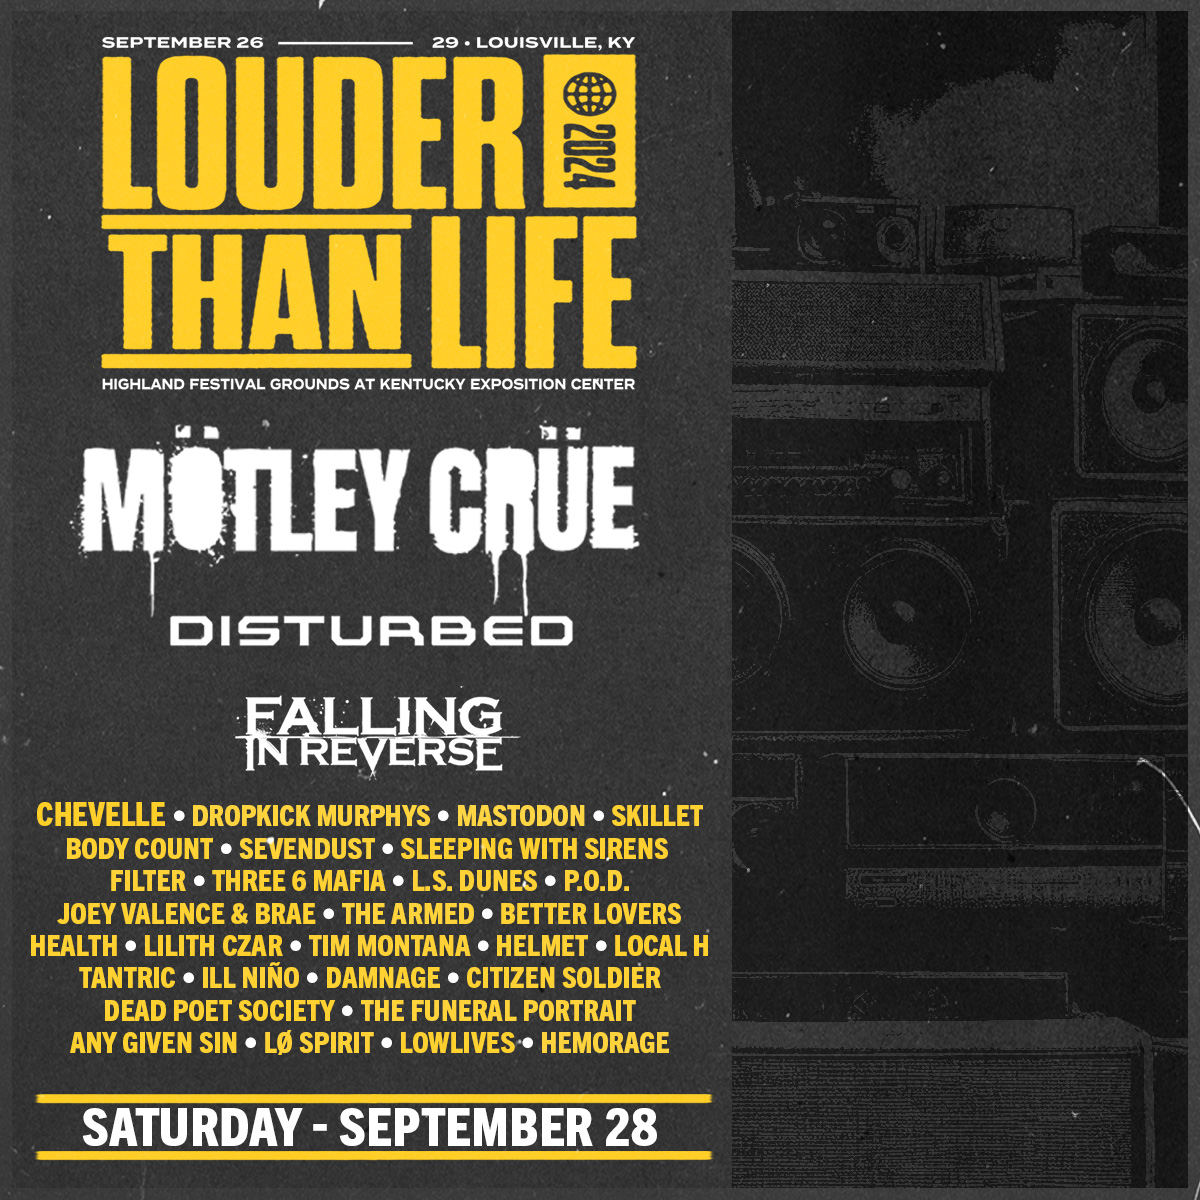 Saturday at Louder Than Life is shaping up to be MASSIVE! @MotleyCrue, @Disturbed, @ChevelleInc, @dropkickmurphys and a stellar lineup of bands are ready to rock your world. 🔥 Don't miss out on the action – snag your single-day passes now and be part of the unforgettable energy!